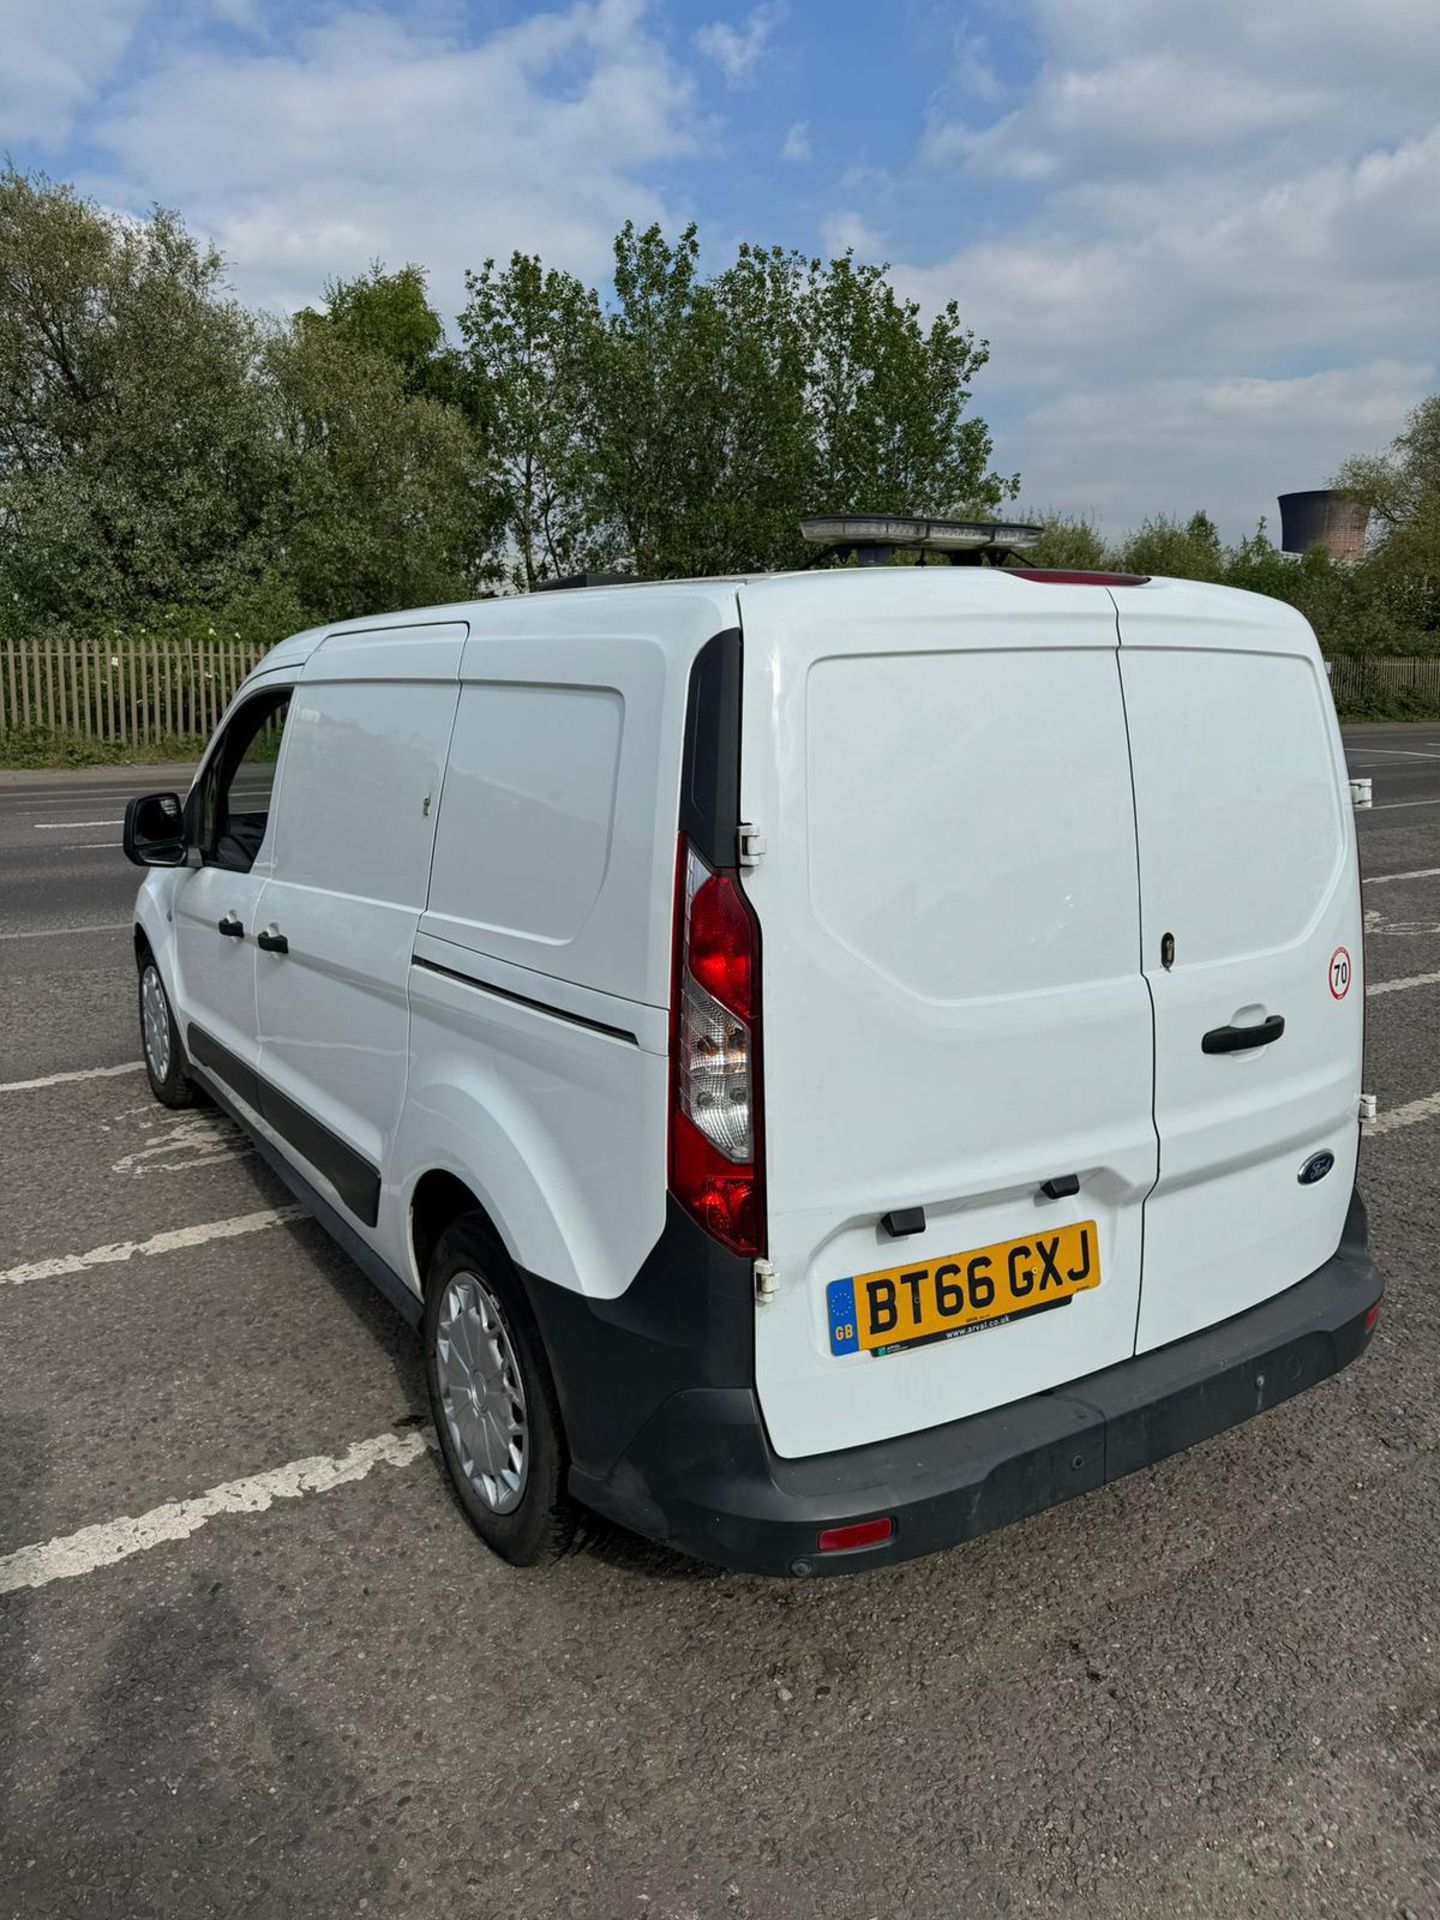 2016 66 FORD TRANSIT CONNECT LWB PANEL VAN - 123K MILES - AIR CON - Image 6 of 6